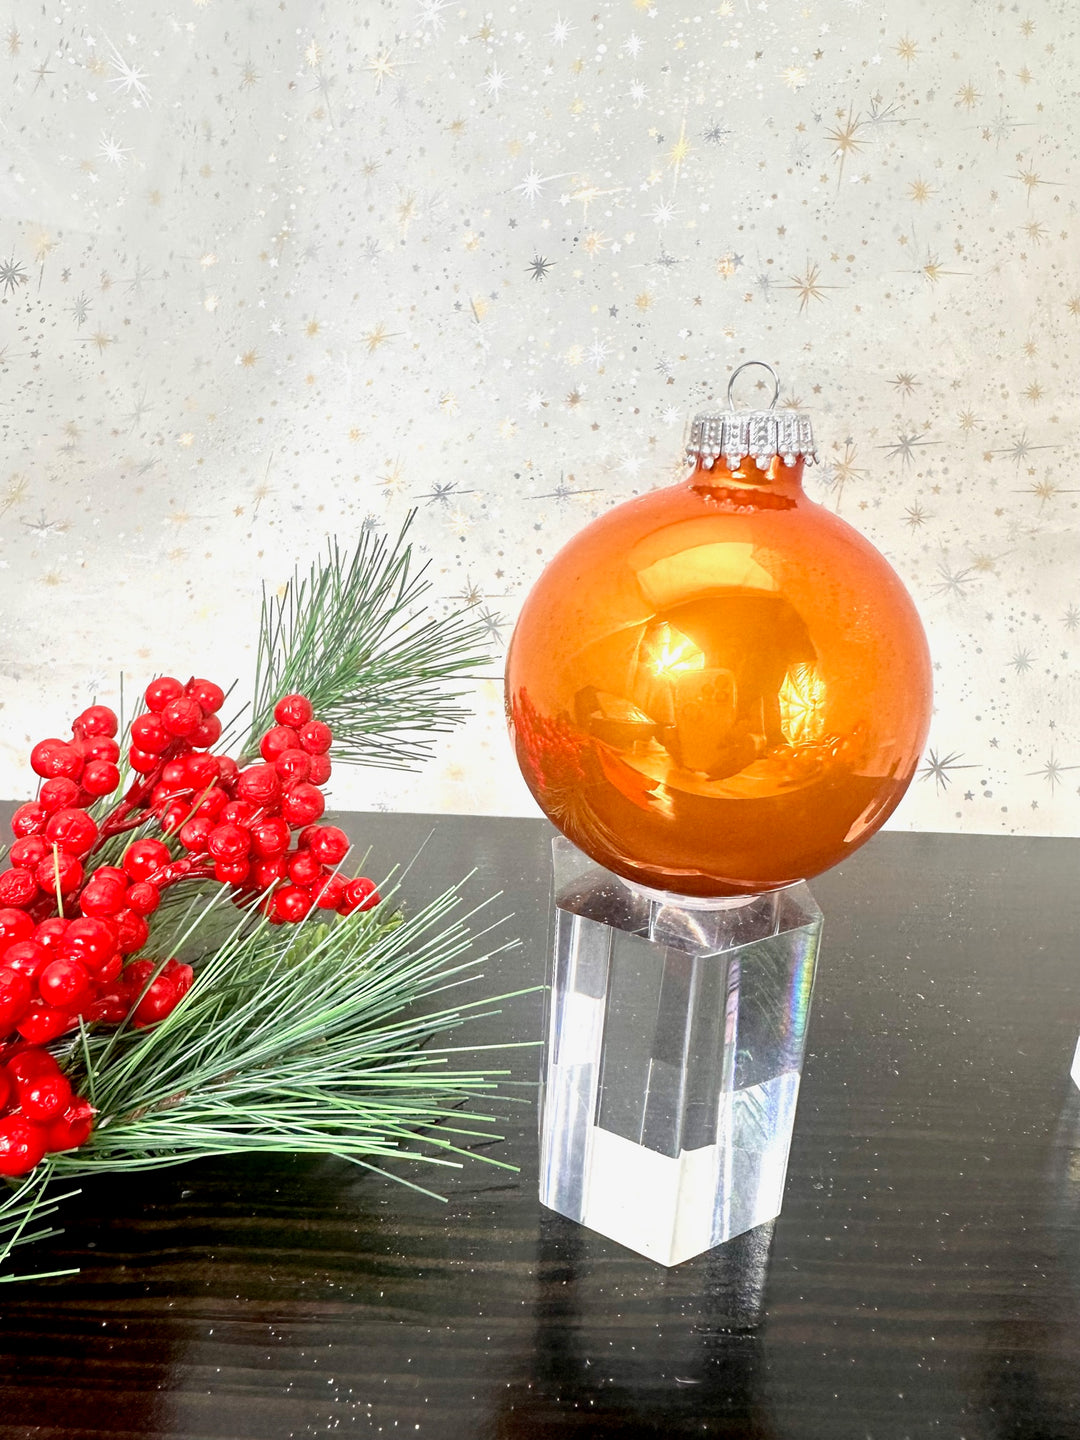 Glass Christmas Tree Ornaments - 67mm / 2.63" [8 Pieces] Designer Balls from Christmas By Krebs Seamless Hanging Holiday Decor (Shiny Orange Crush)